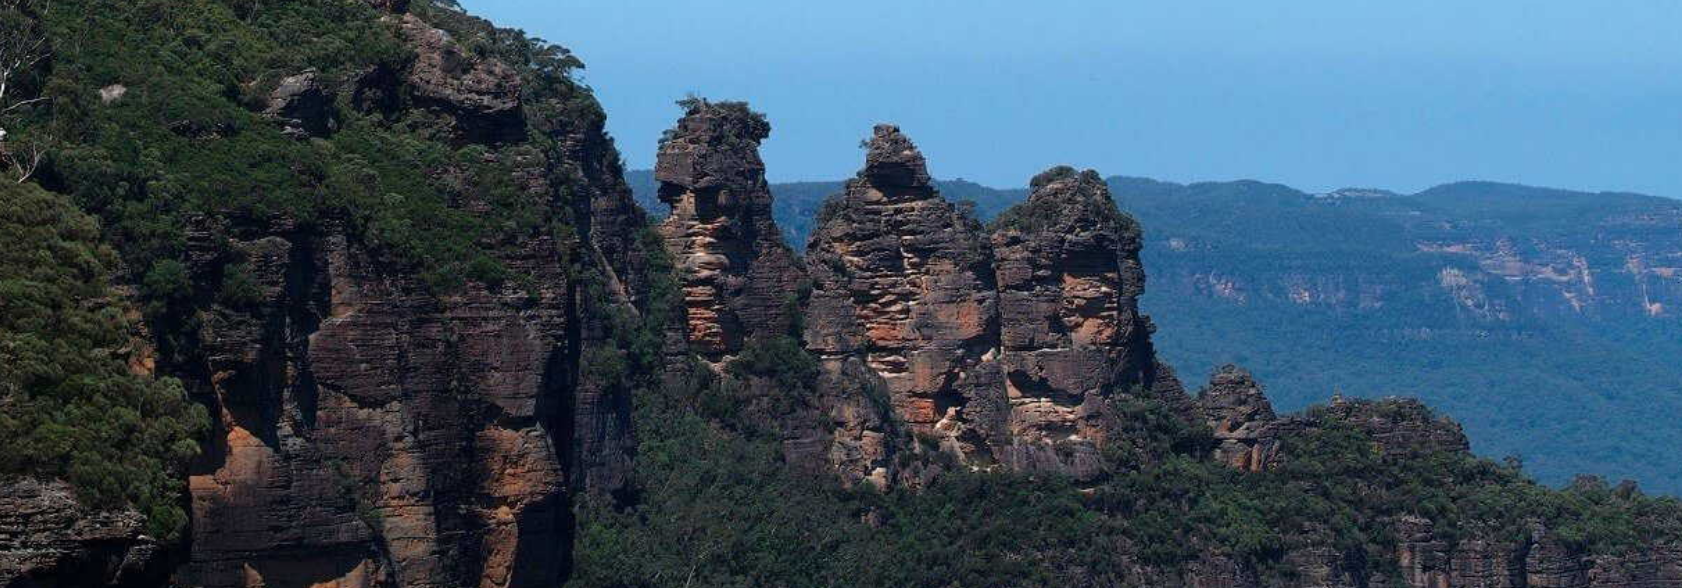 5 things to do when visiting the blue mountains